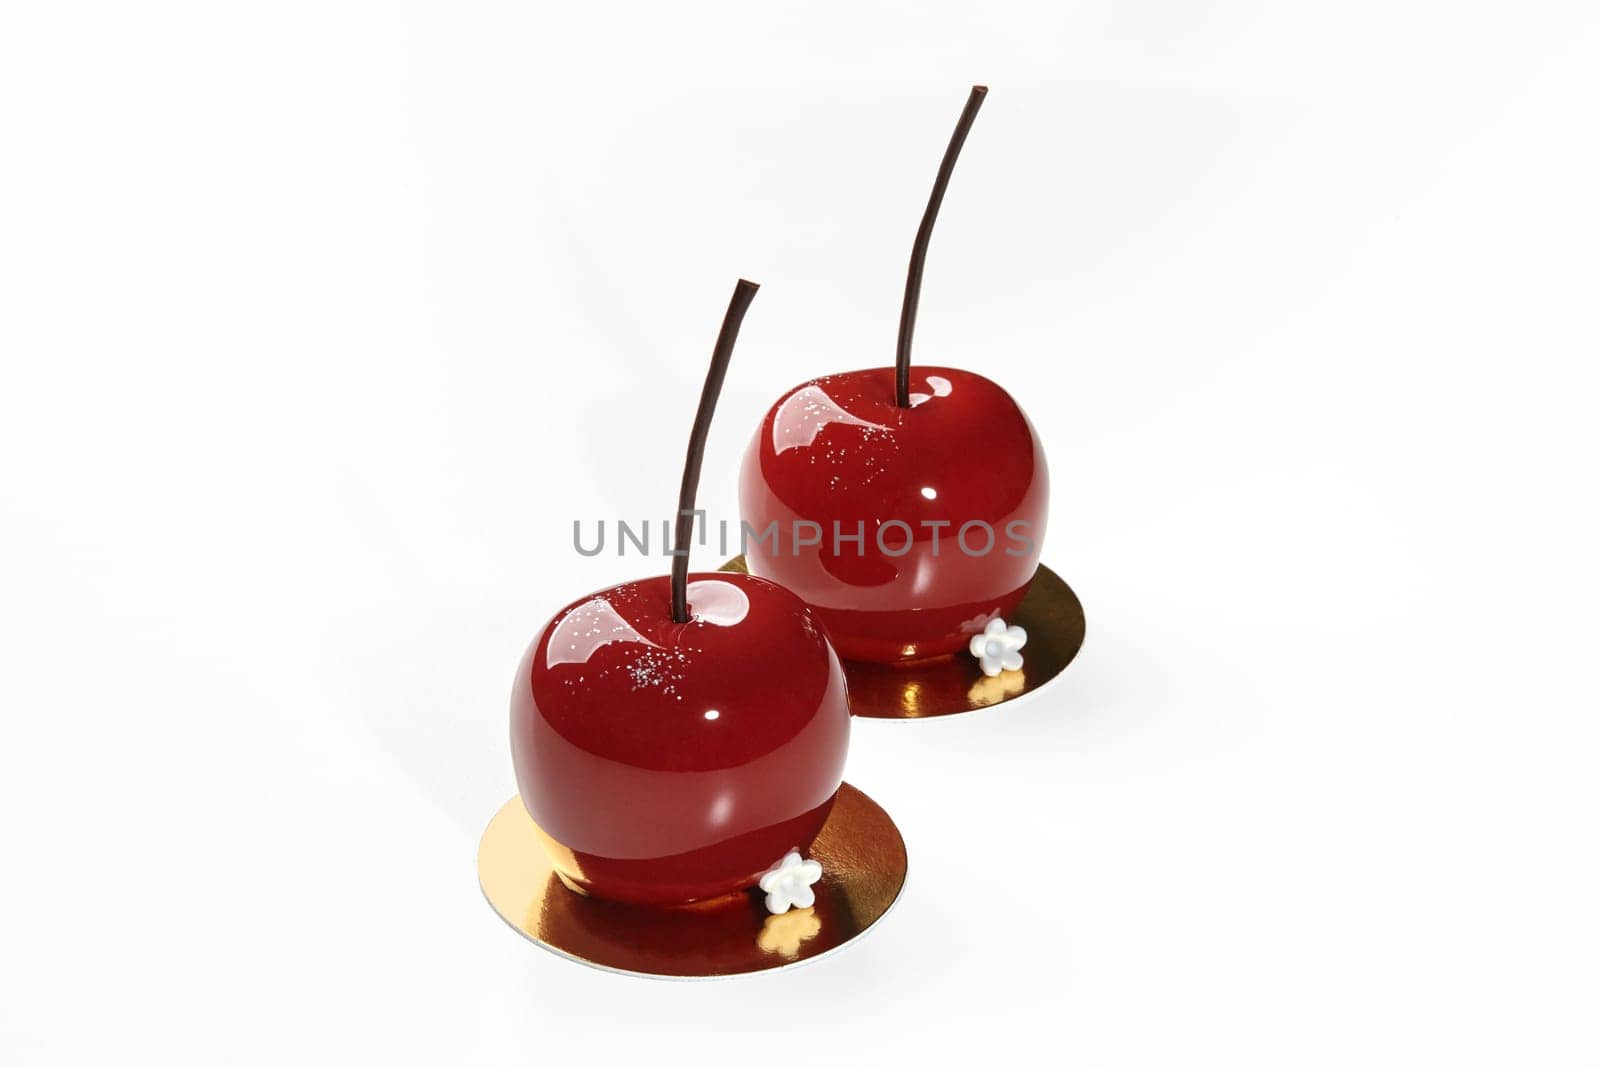 Two exquisite cherry-shaped desserts with mirror-like red glaze and delicate chocolate stems, presented on golden serving cardboards on white